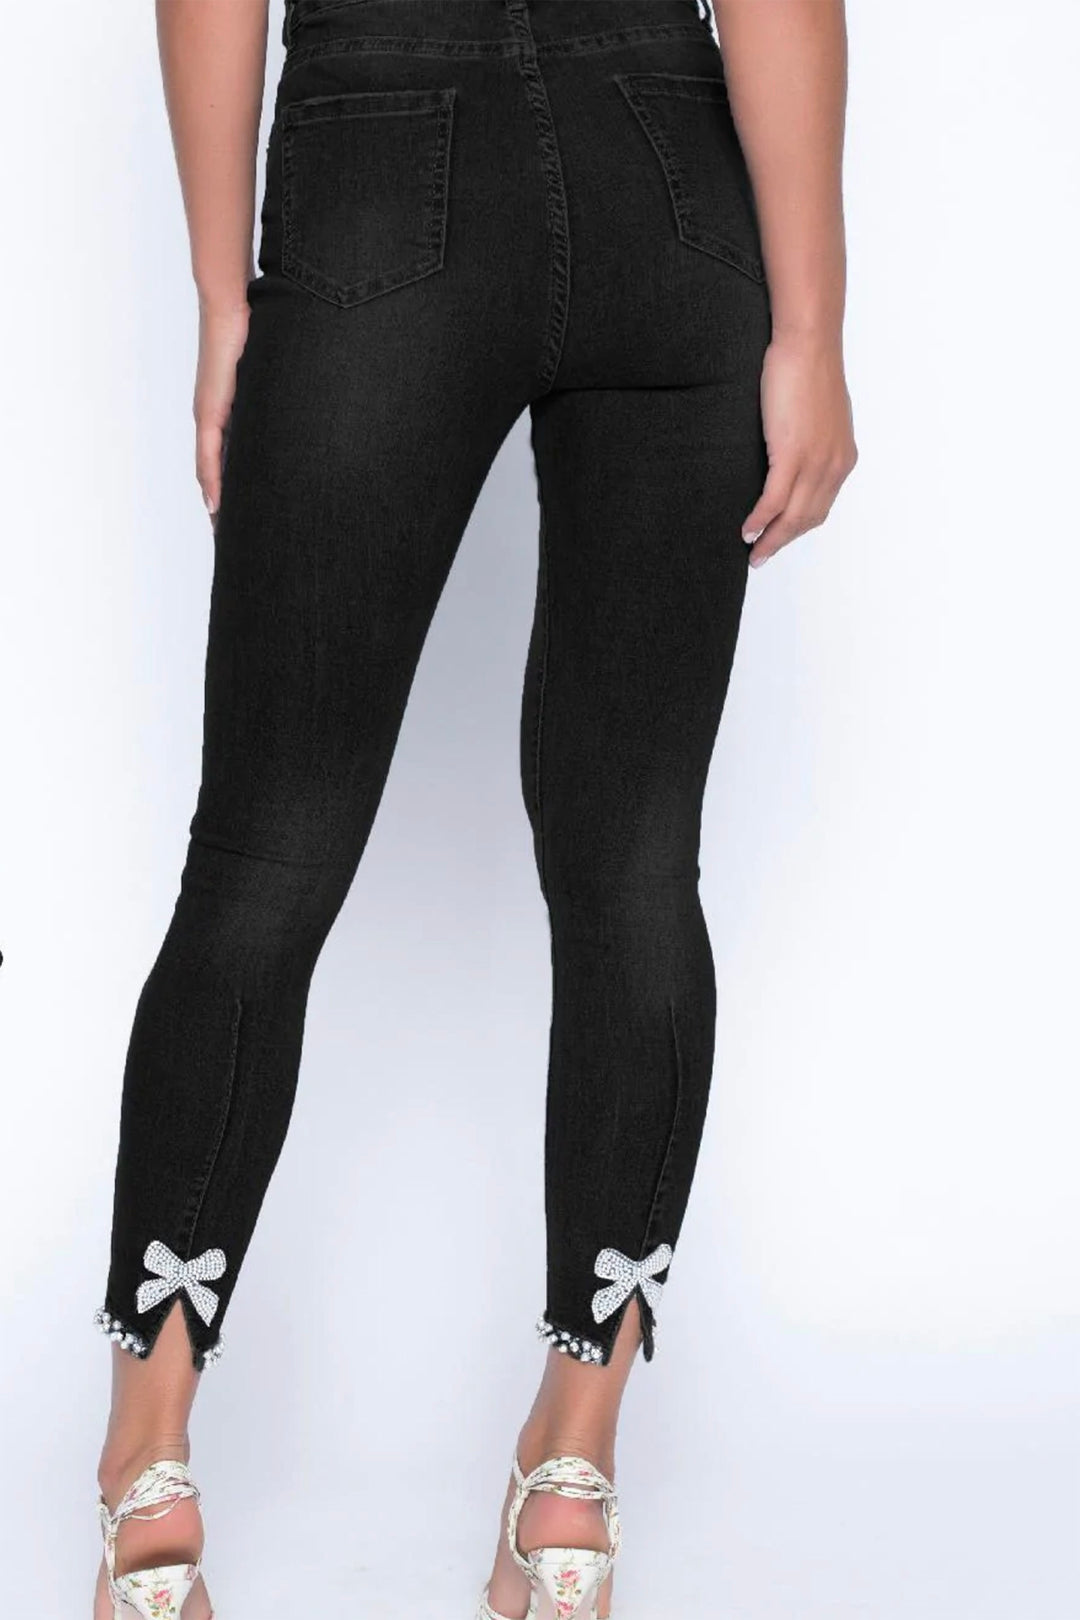 Woman wearing the Bo Pearl Jeans in black by Frank Lyman, sold and shipped from Pizazz Boutique